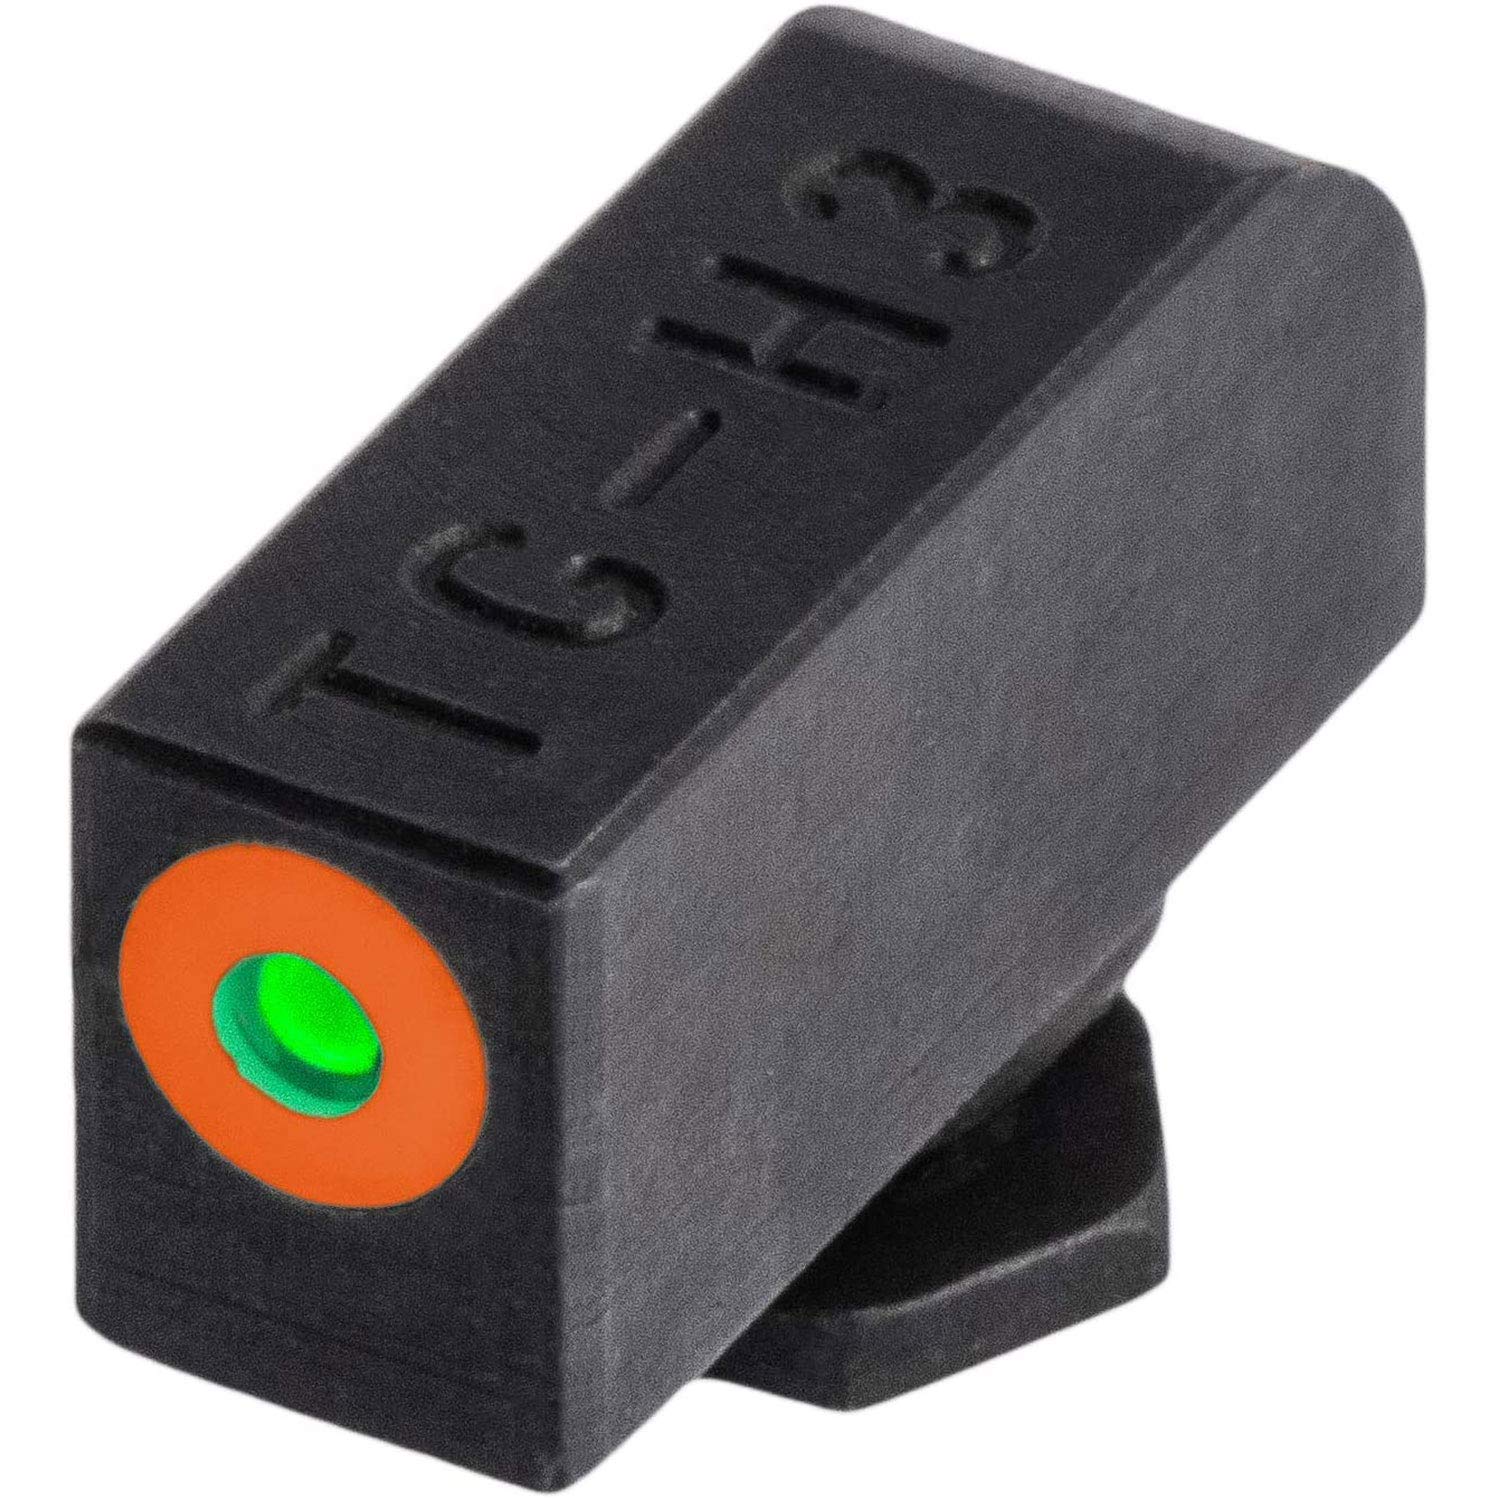 TruGlo Tritium Compact Pro Glow in the Dark Orange Glock Pistol Sight with Focus Lock Ring for Glock 17, 17L, 19 and More